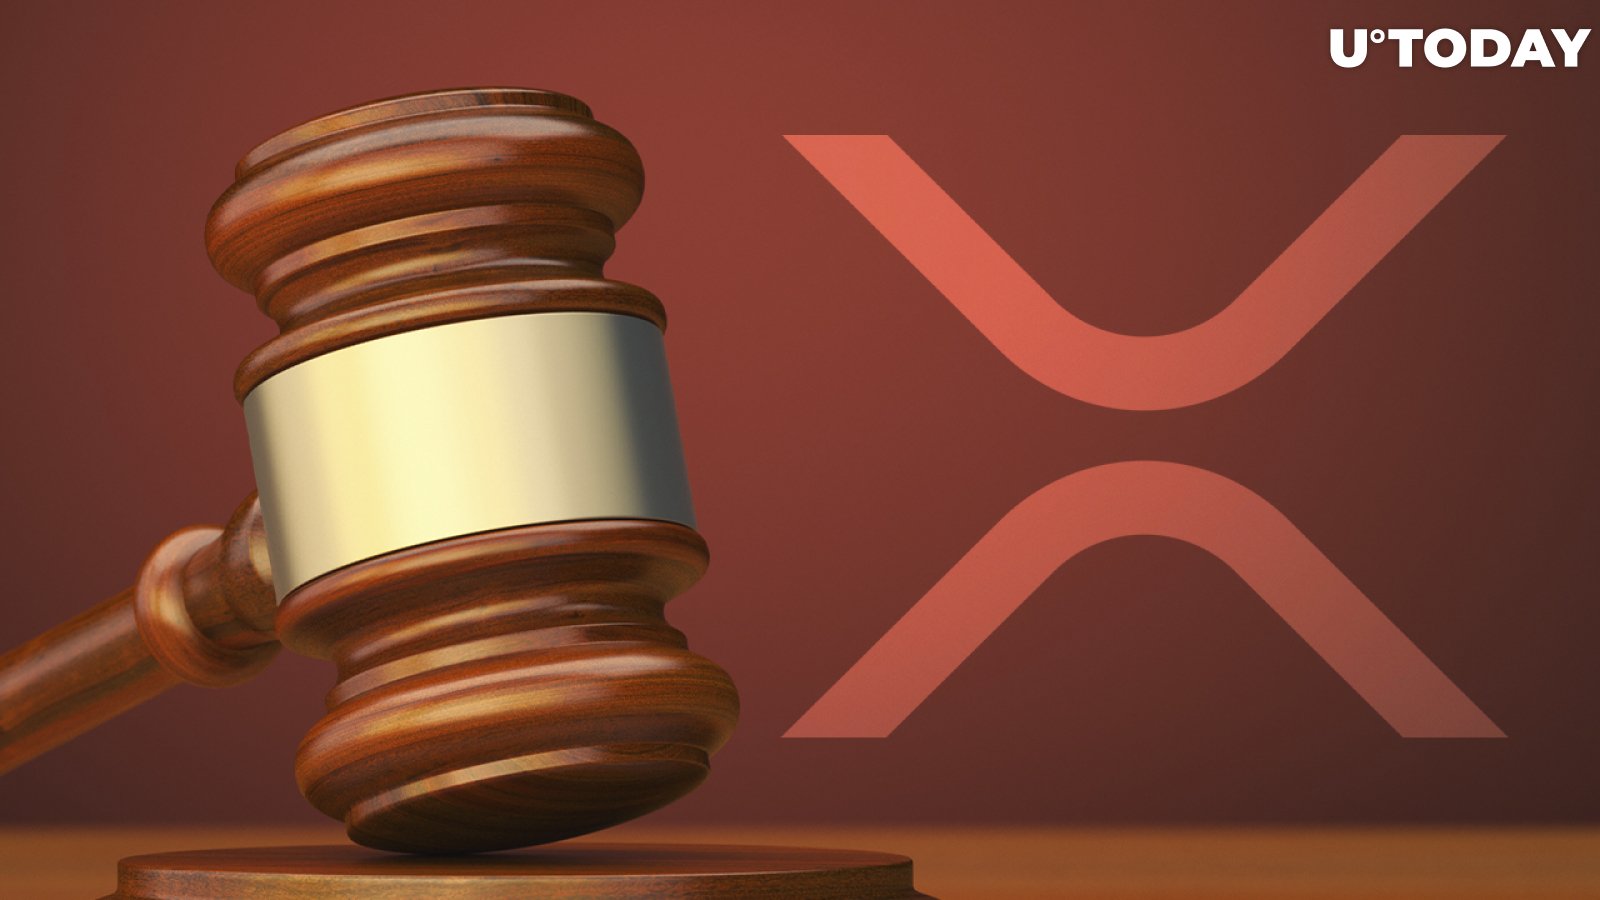 XRP Lawsuit: Cryptolaw Founder Gives Timeline for Settlement